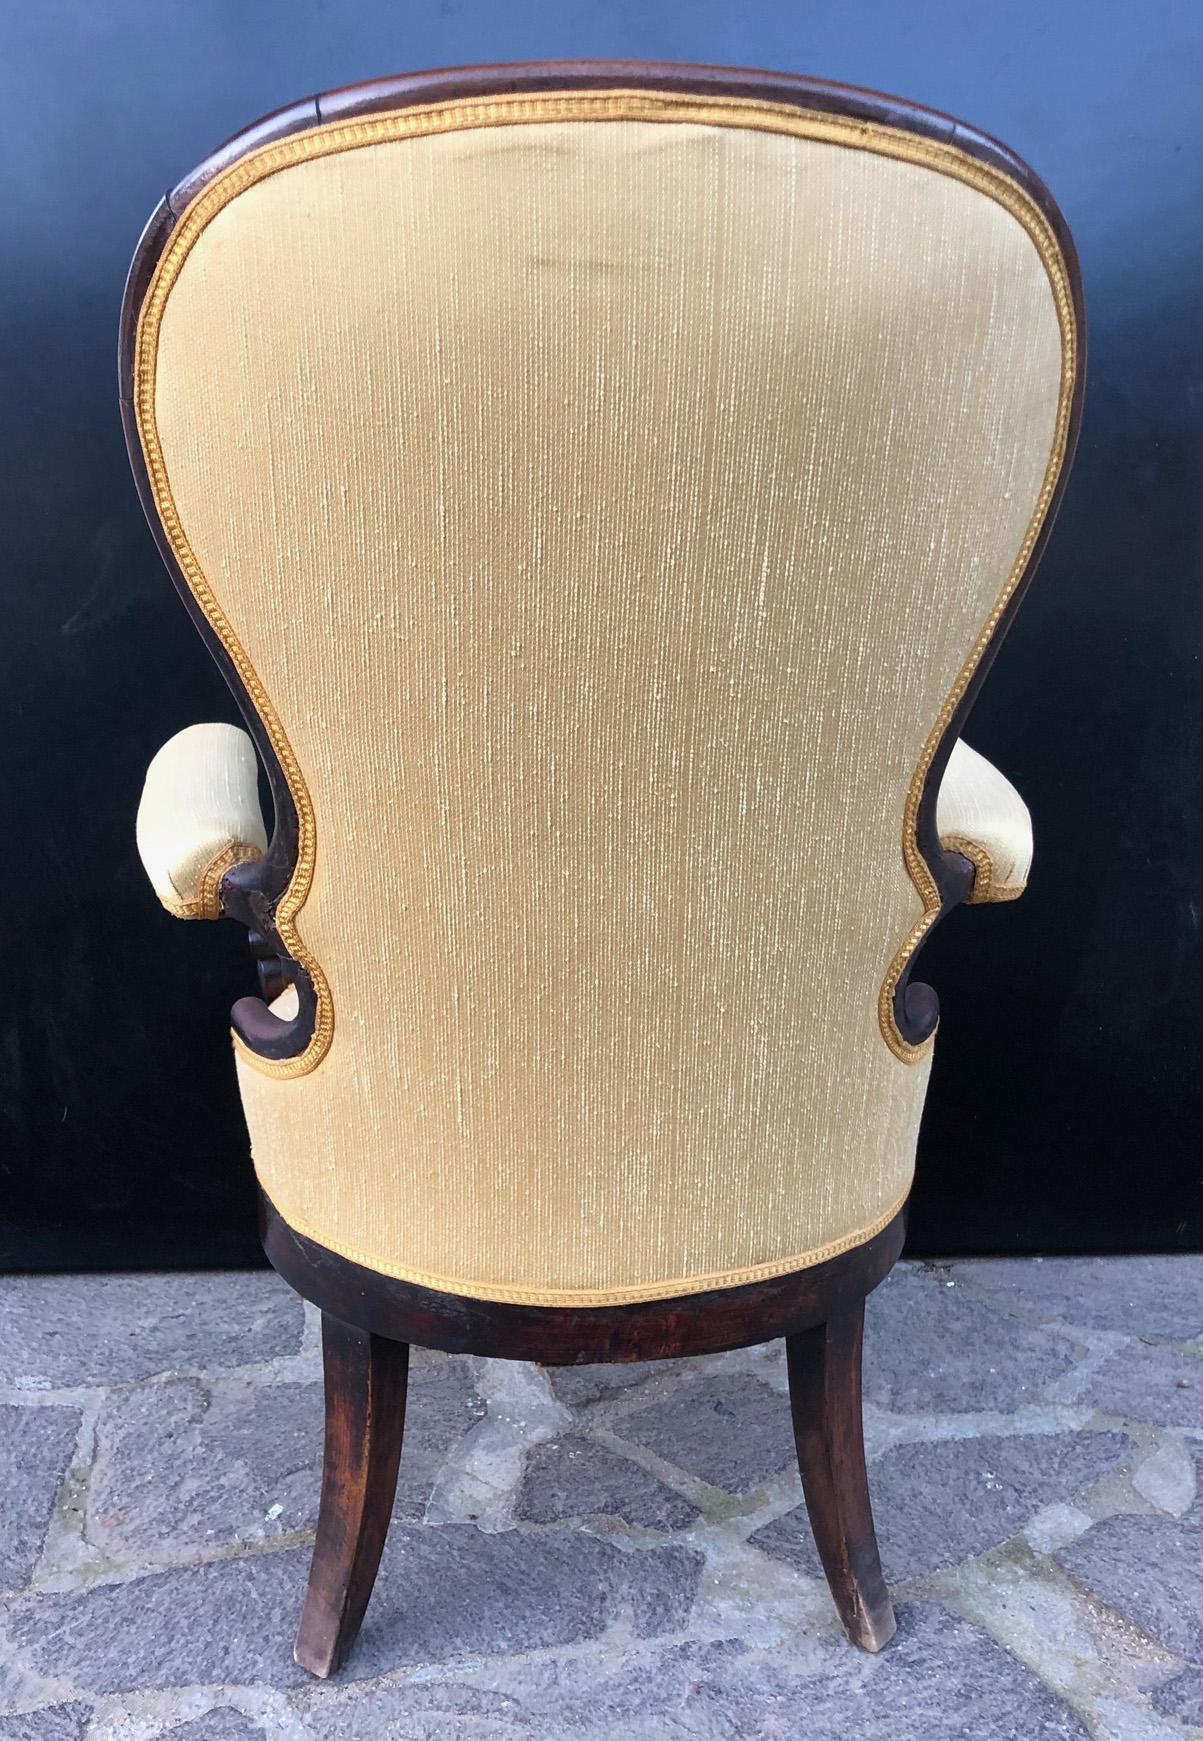 Original 1850 Italian armchair in solid walnut with new upholstery. 
The article used to be in a bedroom.
 Later it was placed at the entrance of an important house in a waiting area near the door.
It comes from an old country house in the